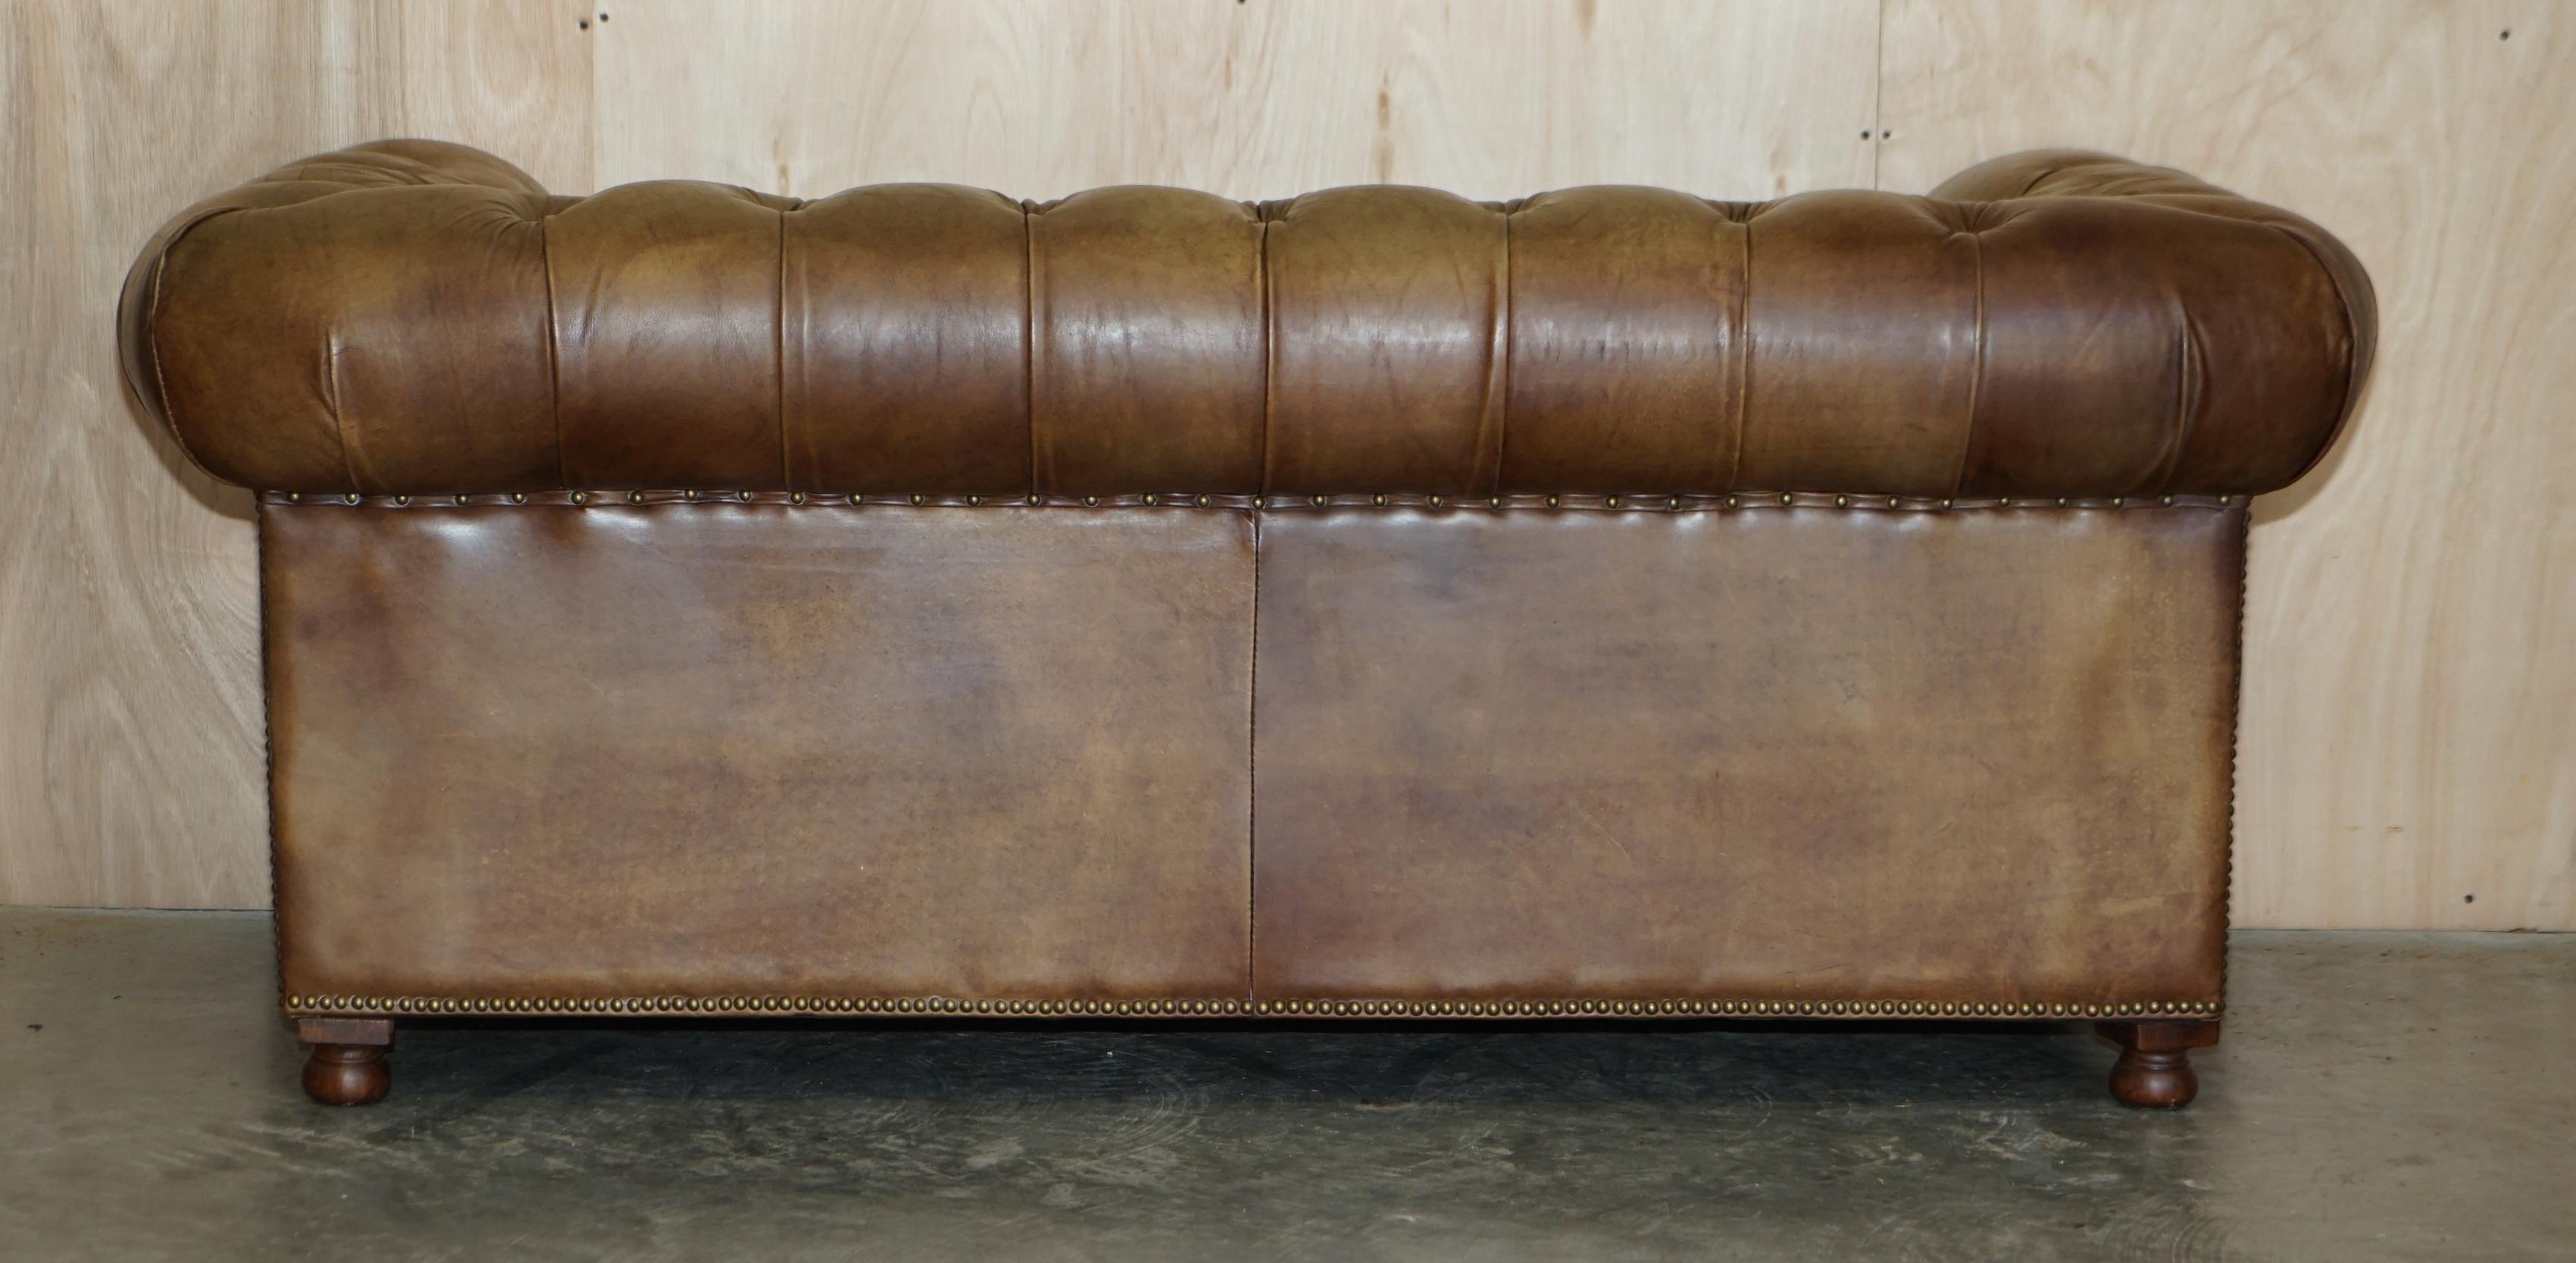 STUNNING TIMOTHY OULTON HALO WESTMiNSTER BROWN LEATHER CHESTERFIELD TUFTED SOFA 1